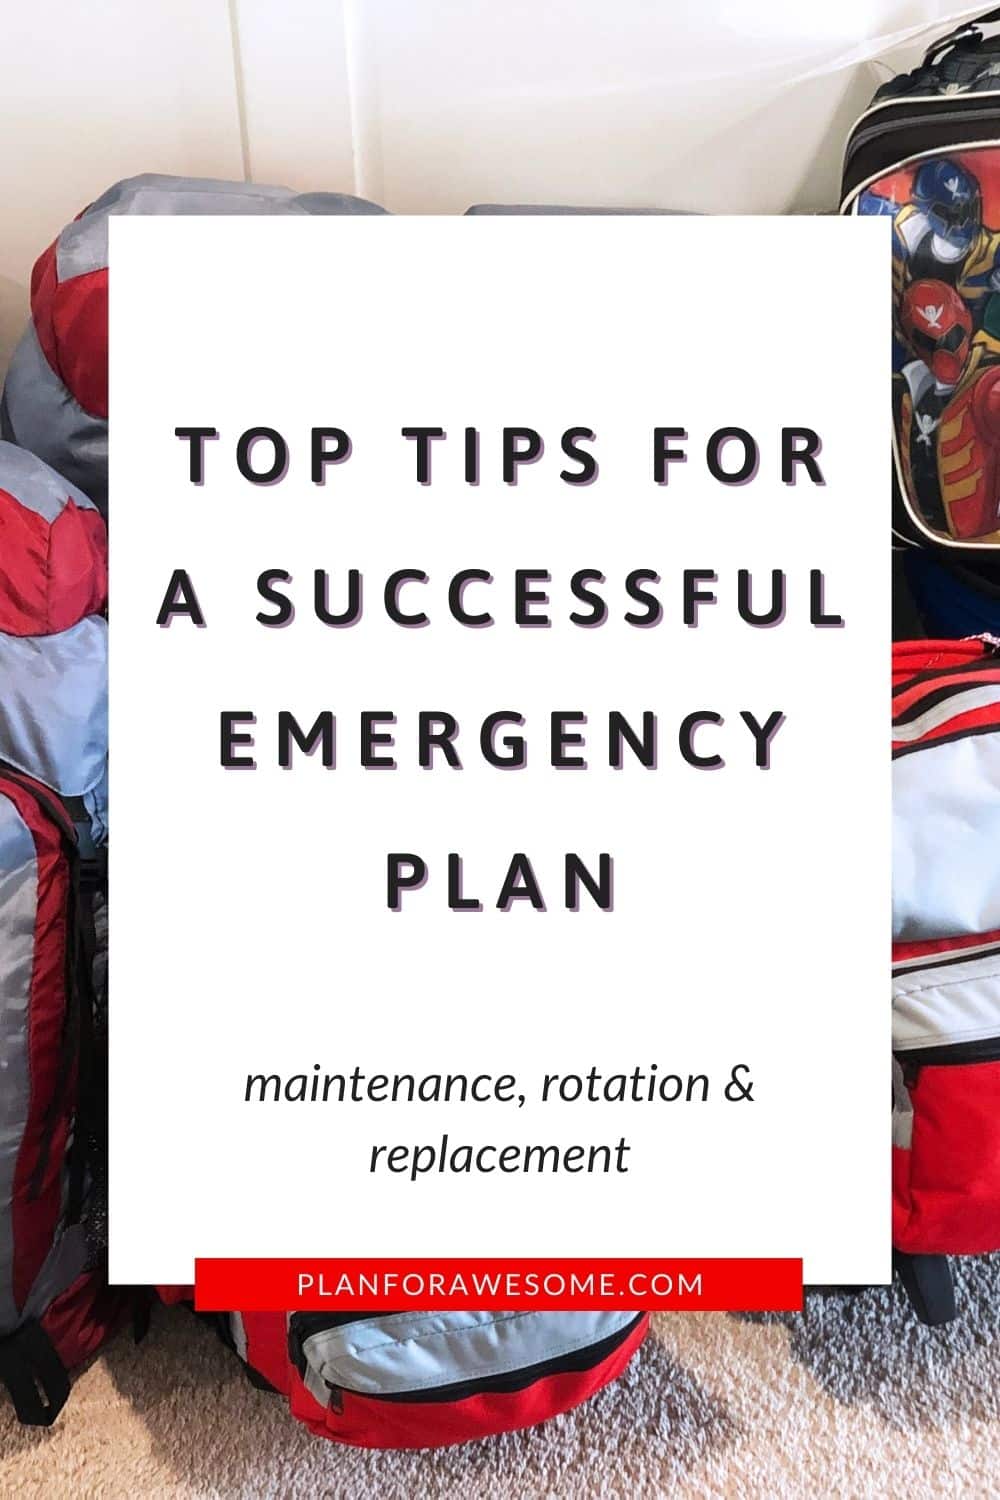 How to Maintain Success at Emergency Preparedness